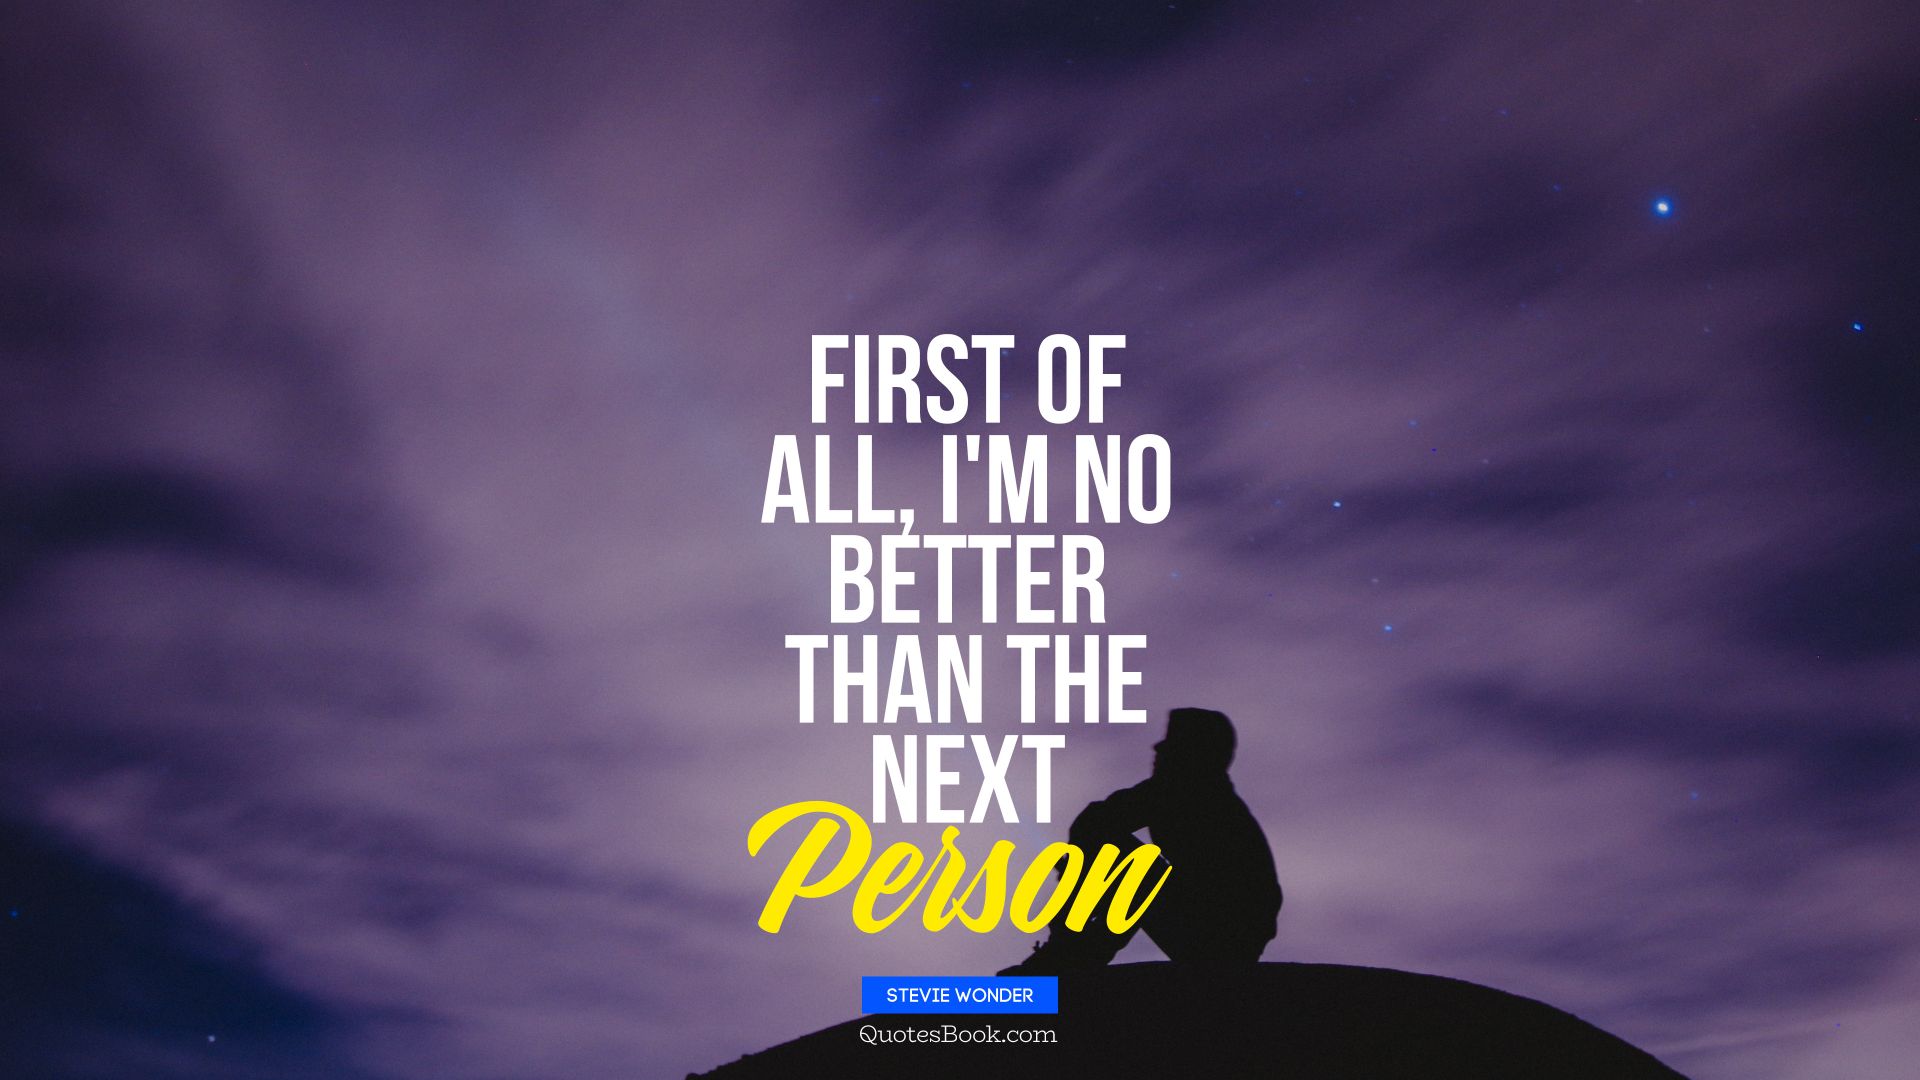 First of all, I'm no better than the next Person. - Quote by Stevie Wonder